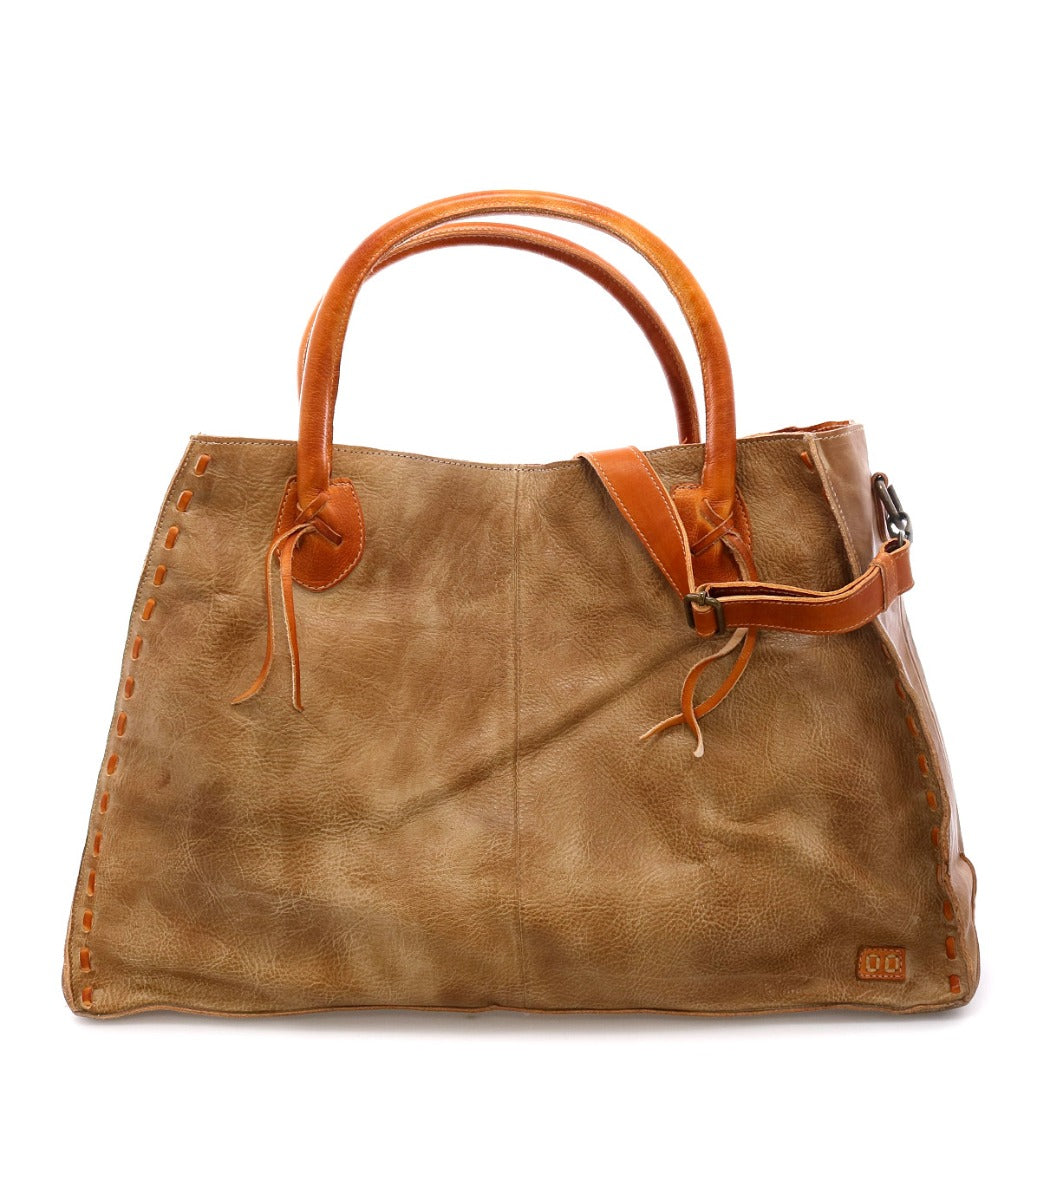 A Rockaway leather tote bag with Bed Stu leather handles.